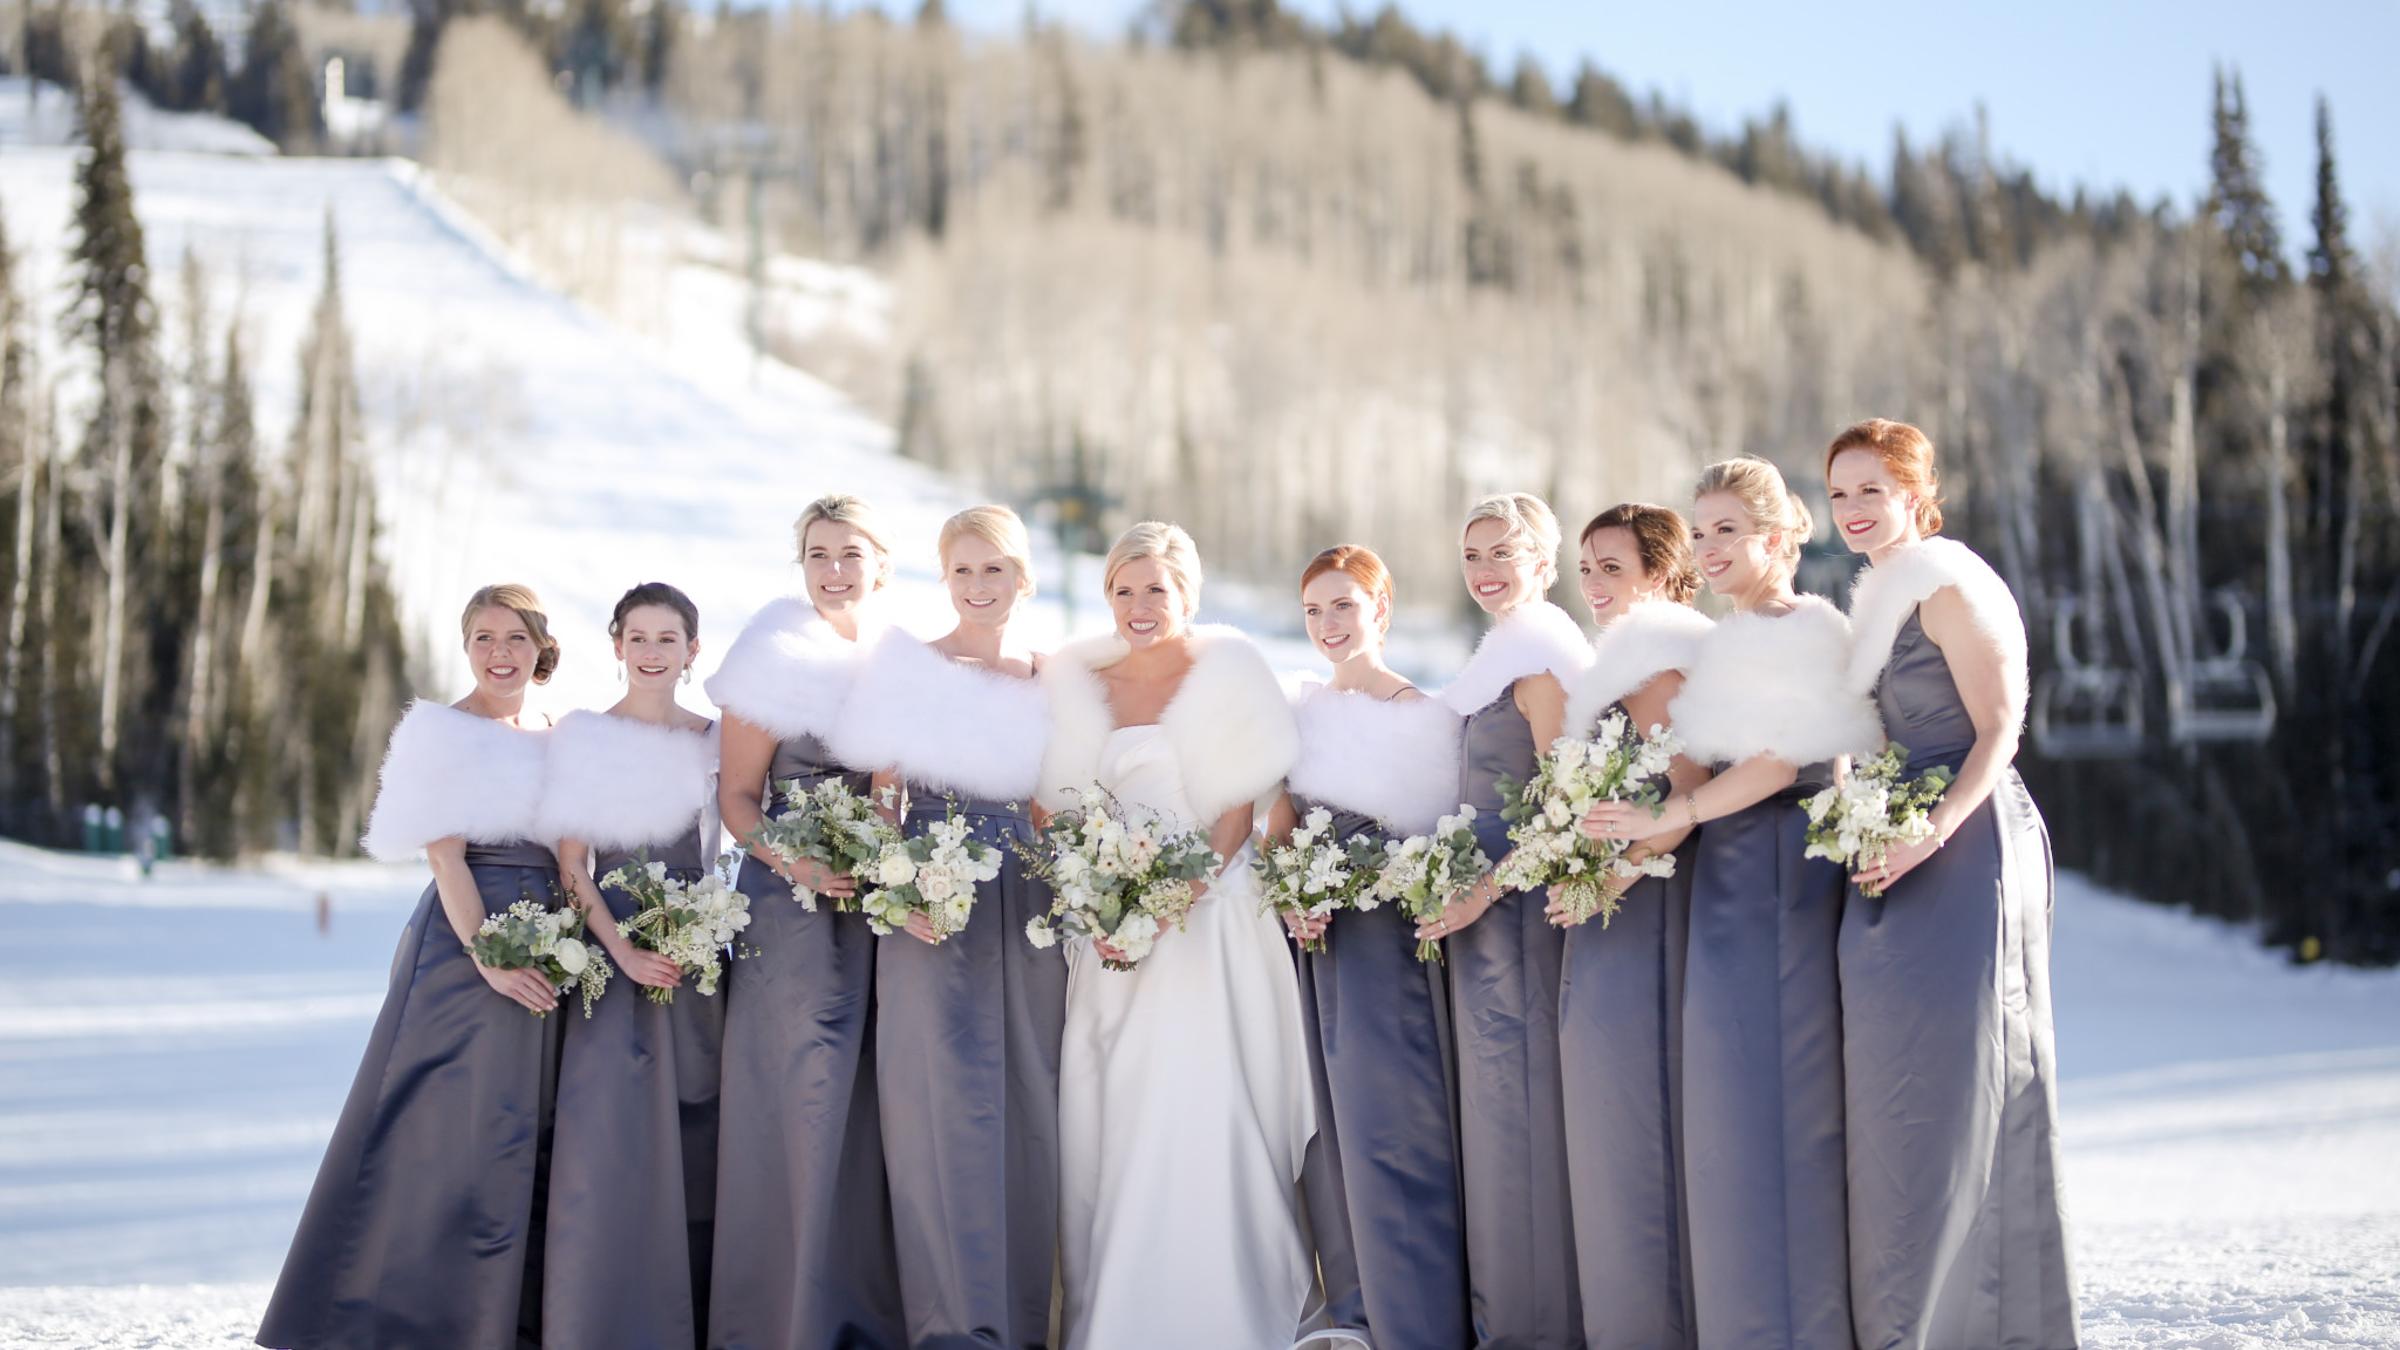 A bride and her bridesmaids at Deer Valley Resort